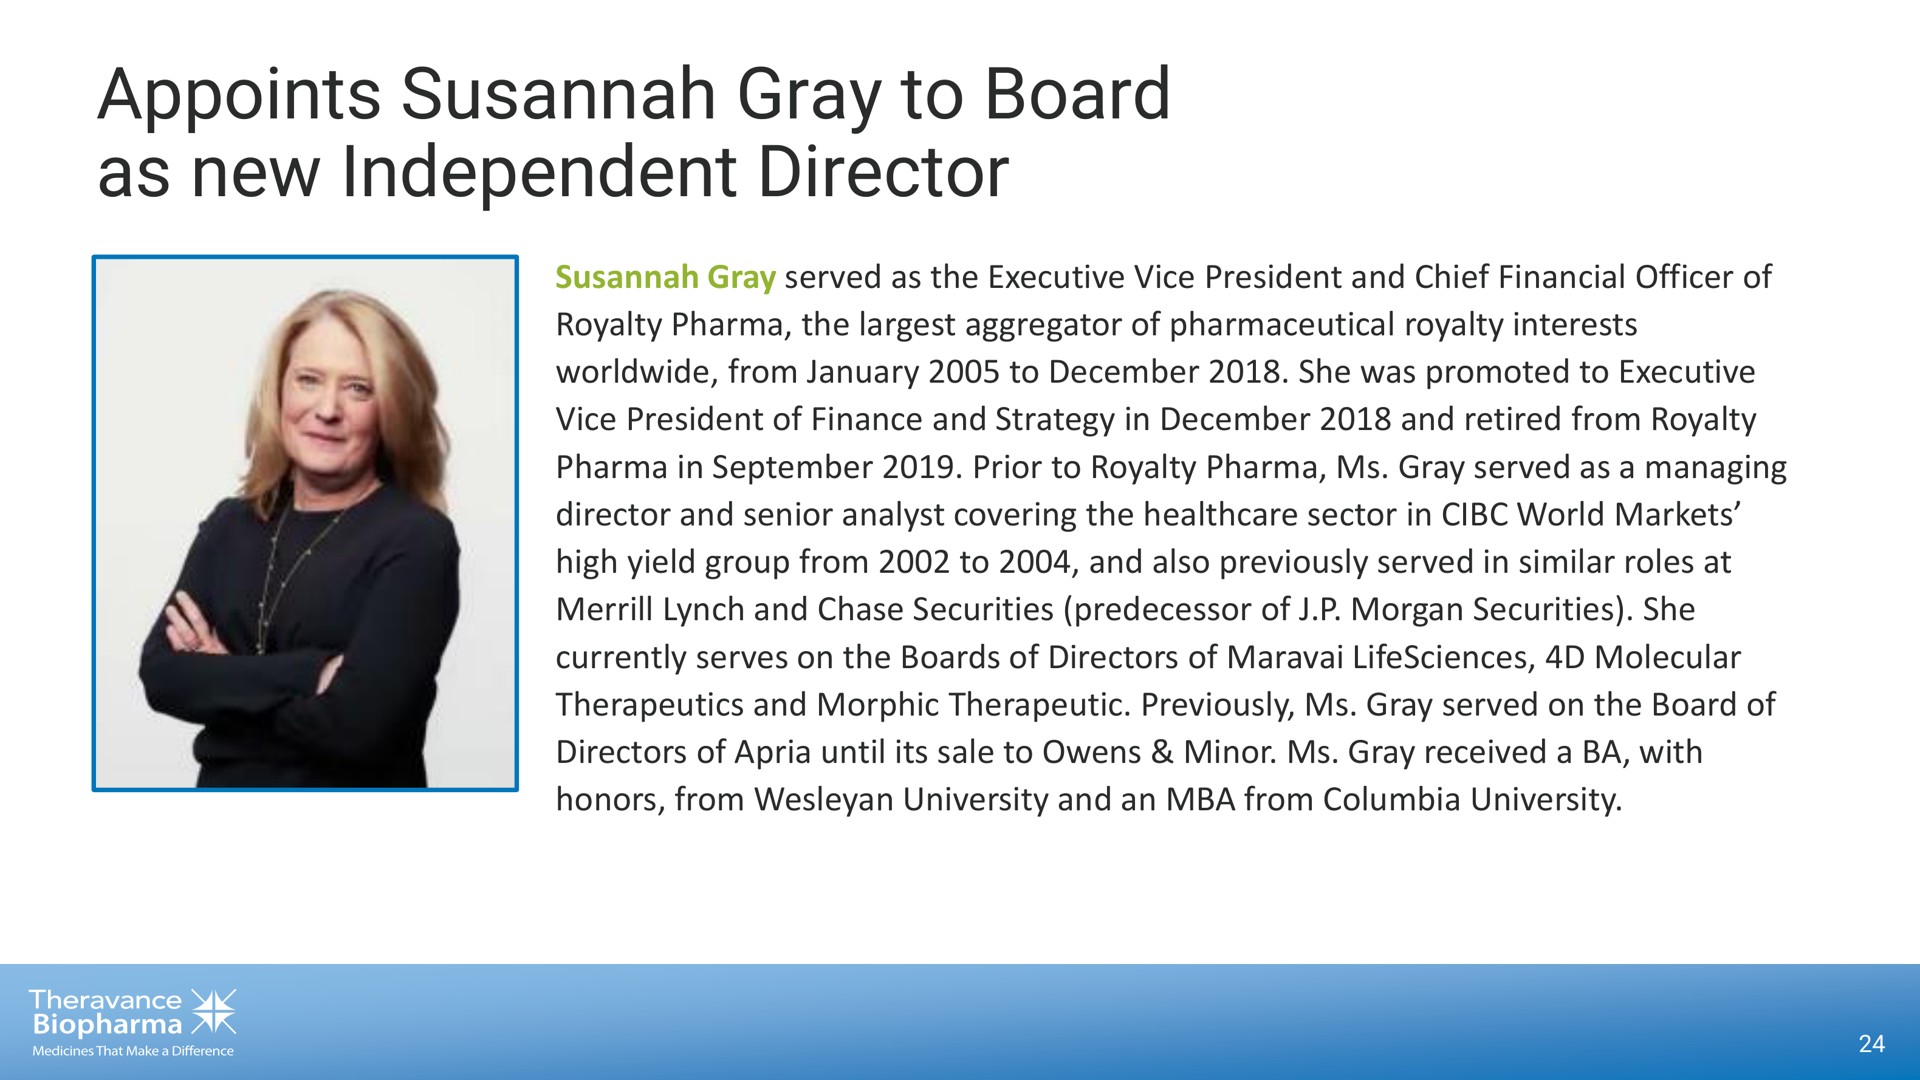 appoints gray to board as new independent director | Theravance Biopharma